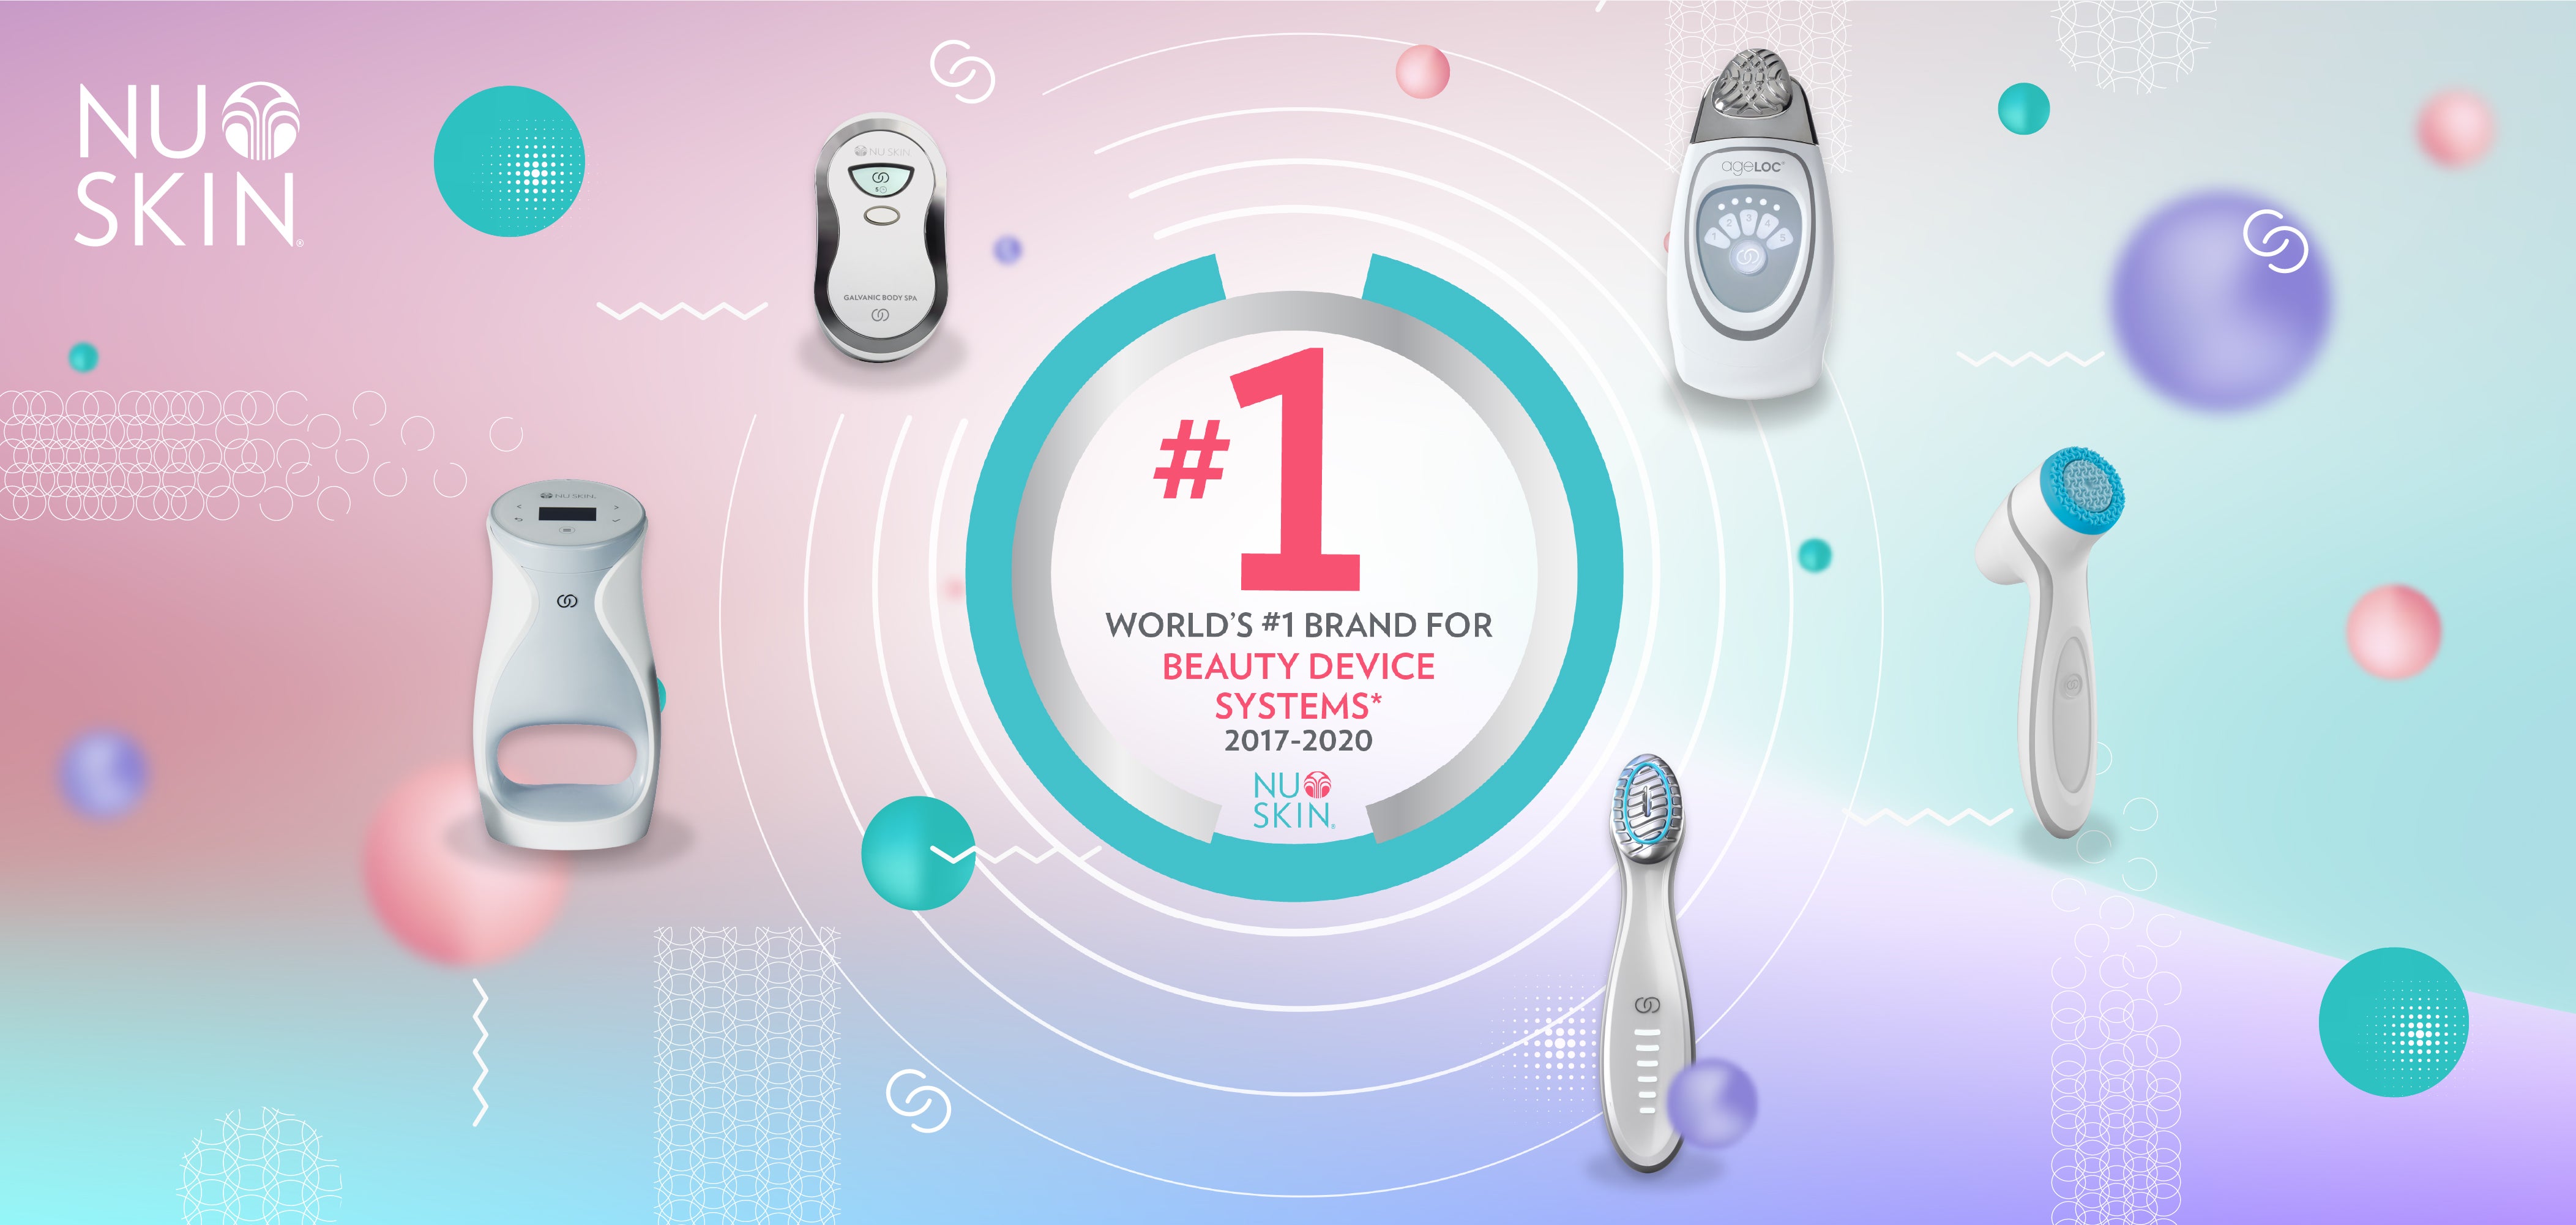 Nu Skin is The World's #1 Brand for Beauty Device Systems, in succession  for 4 years! (1 April, 2021)